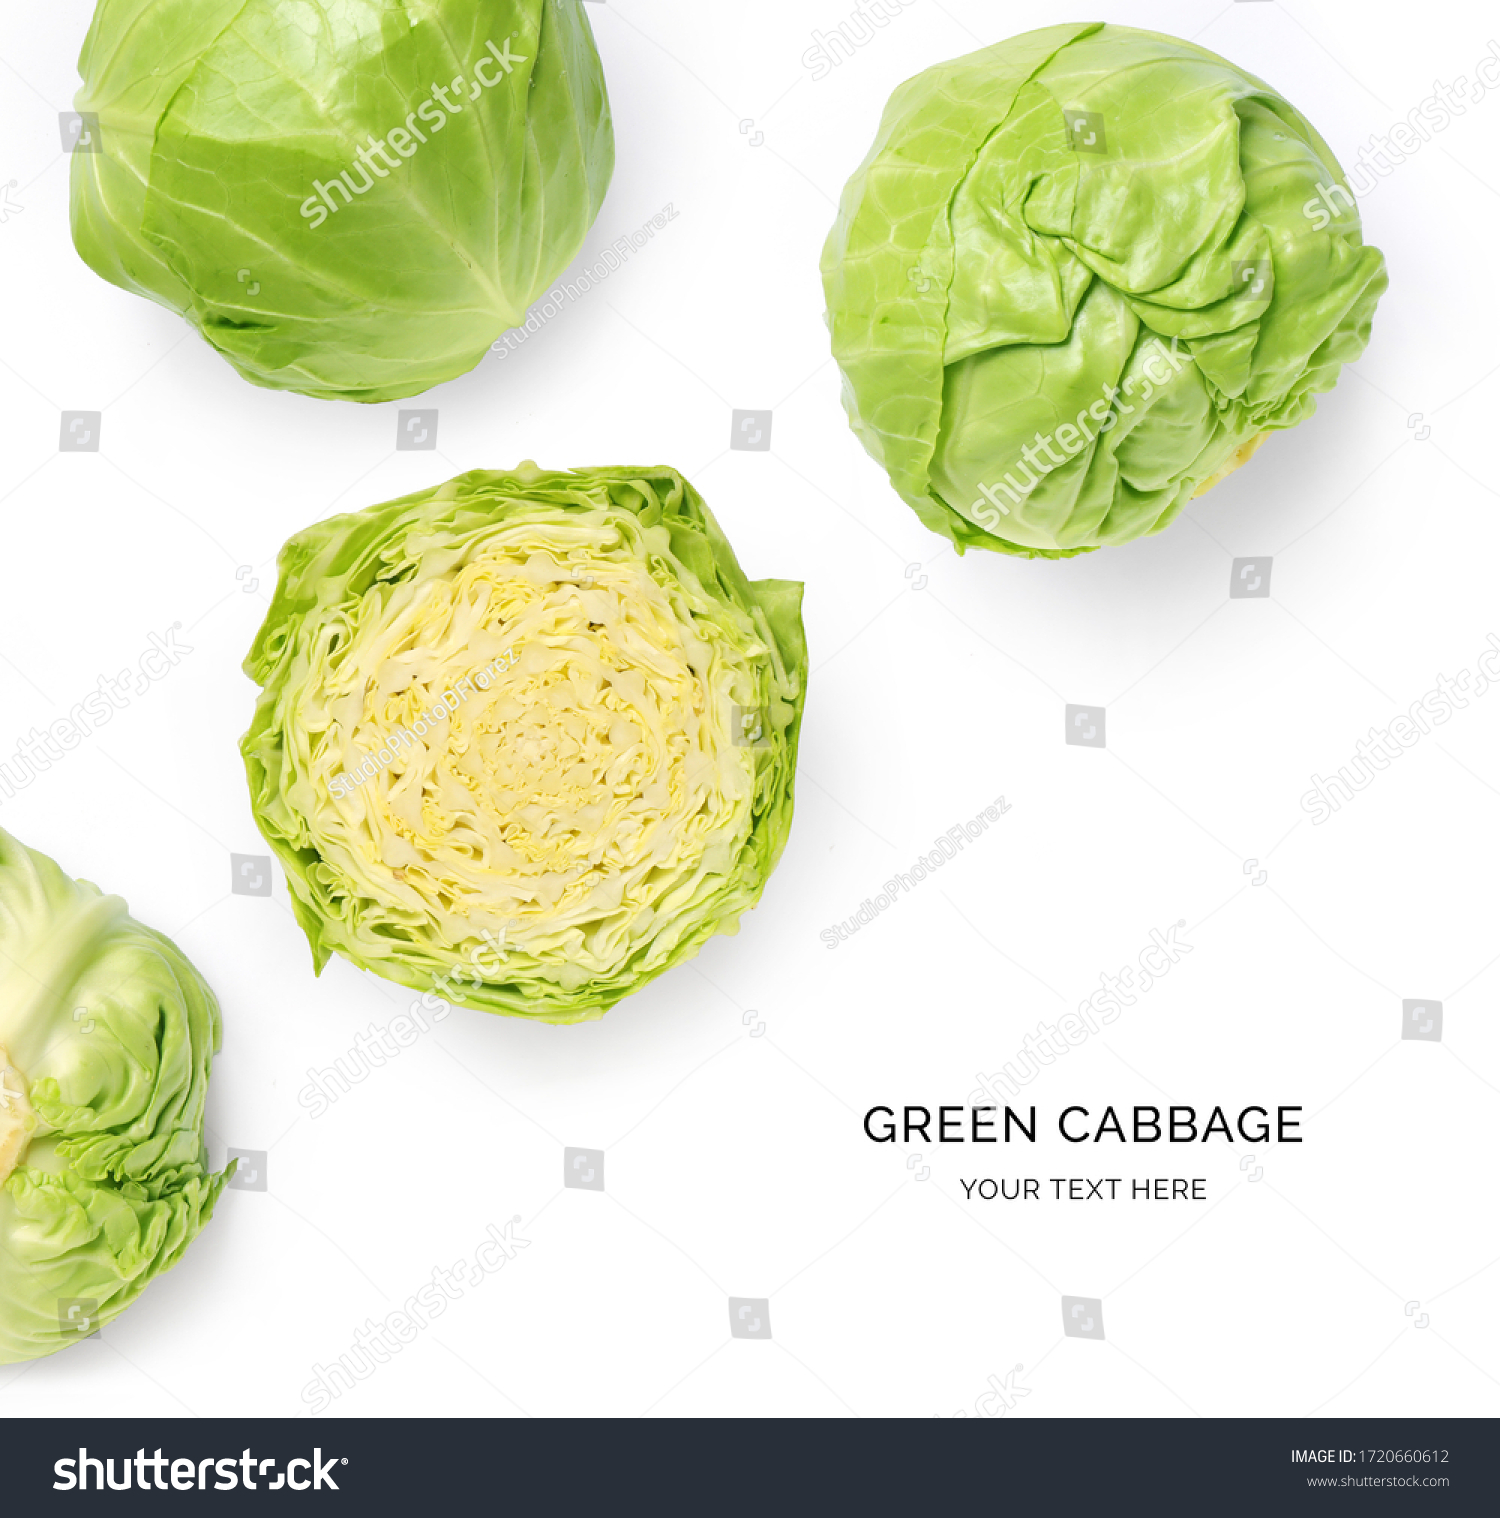 Creative layout made of green cabbage on a white background. Top view. #1720660612